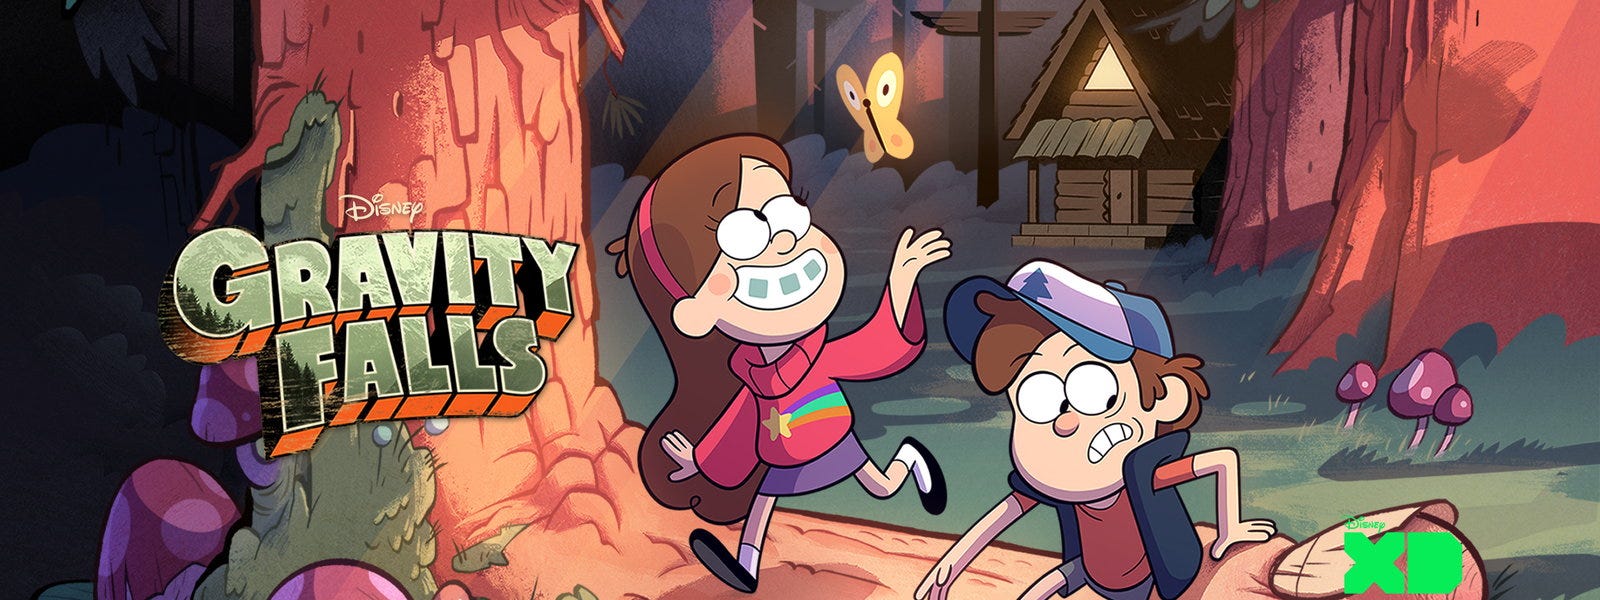 Why Gravity Falls is One of the Most Influential Cartoons of the Decade, by Luc Haasbroek